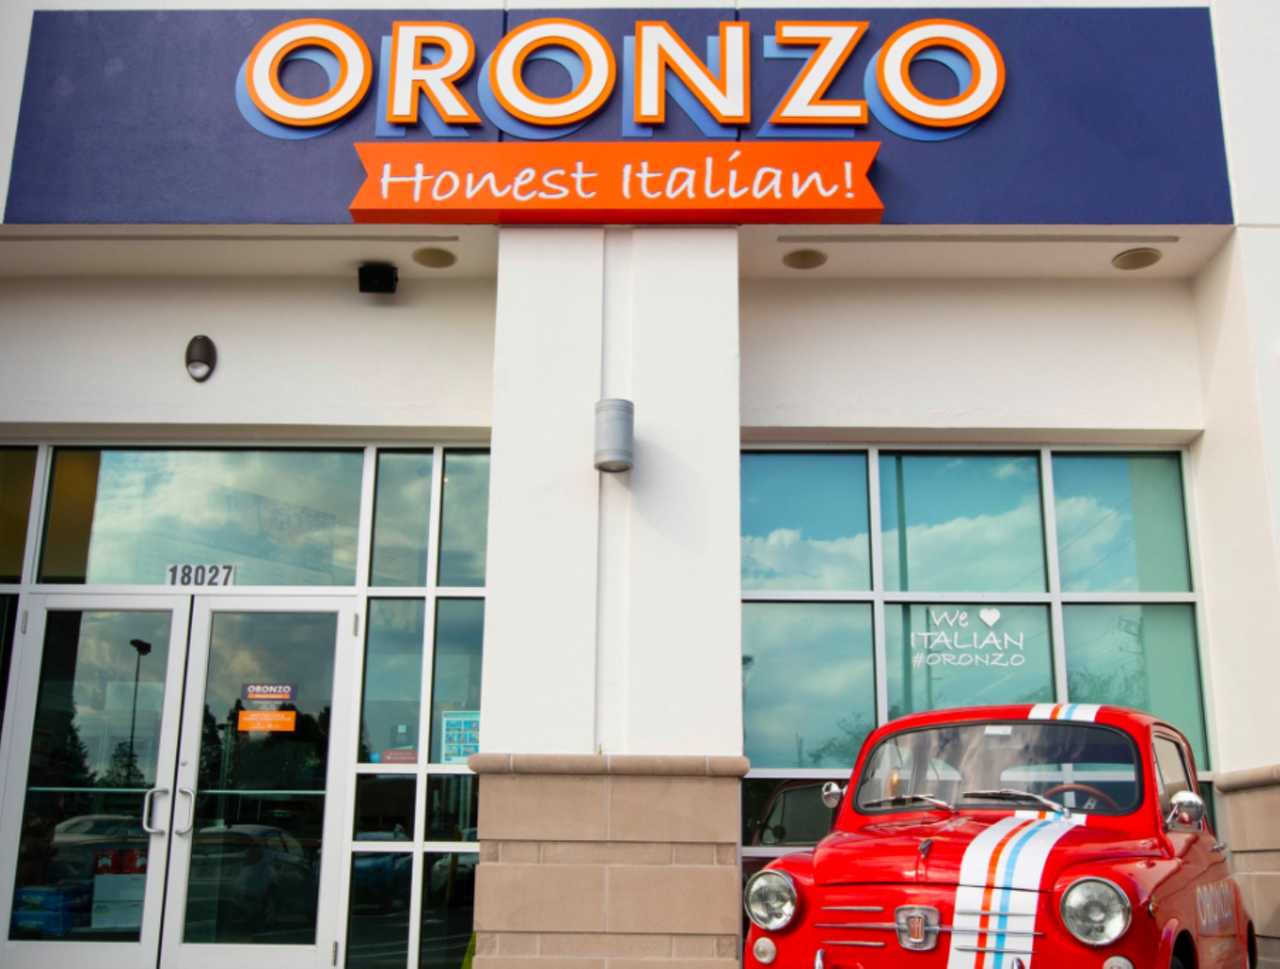 Oronzo Honest Italian
18027 Highwoods Preserve Pkwy., Tampa, 813-730-0100 
The fast-casual Oronzo Honest Italian boasts a loaded menu filled with Italian soups, salads, pizzas and its "Italian burritos." Oronzo also incorporates options for dietary restrictions like gluten-free noodles and vegan dishes. 
Photo via Oronzo Honest Italian/Facebook